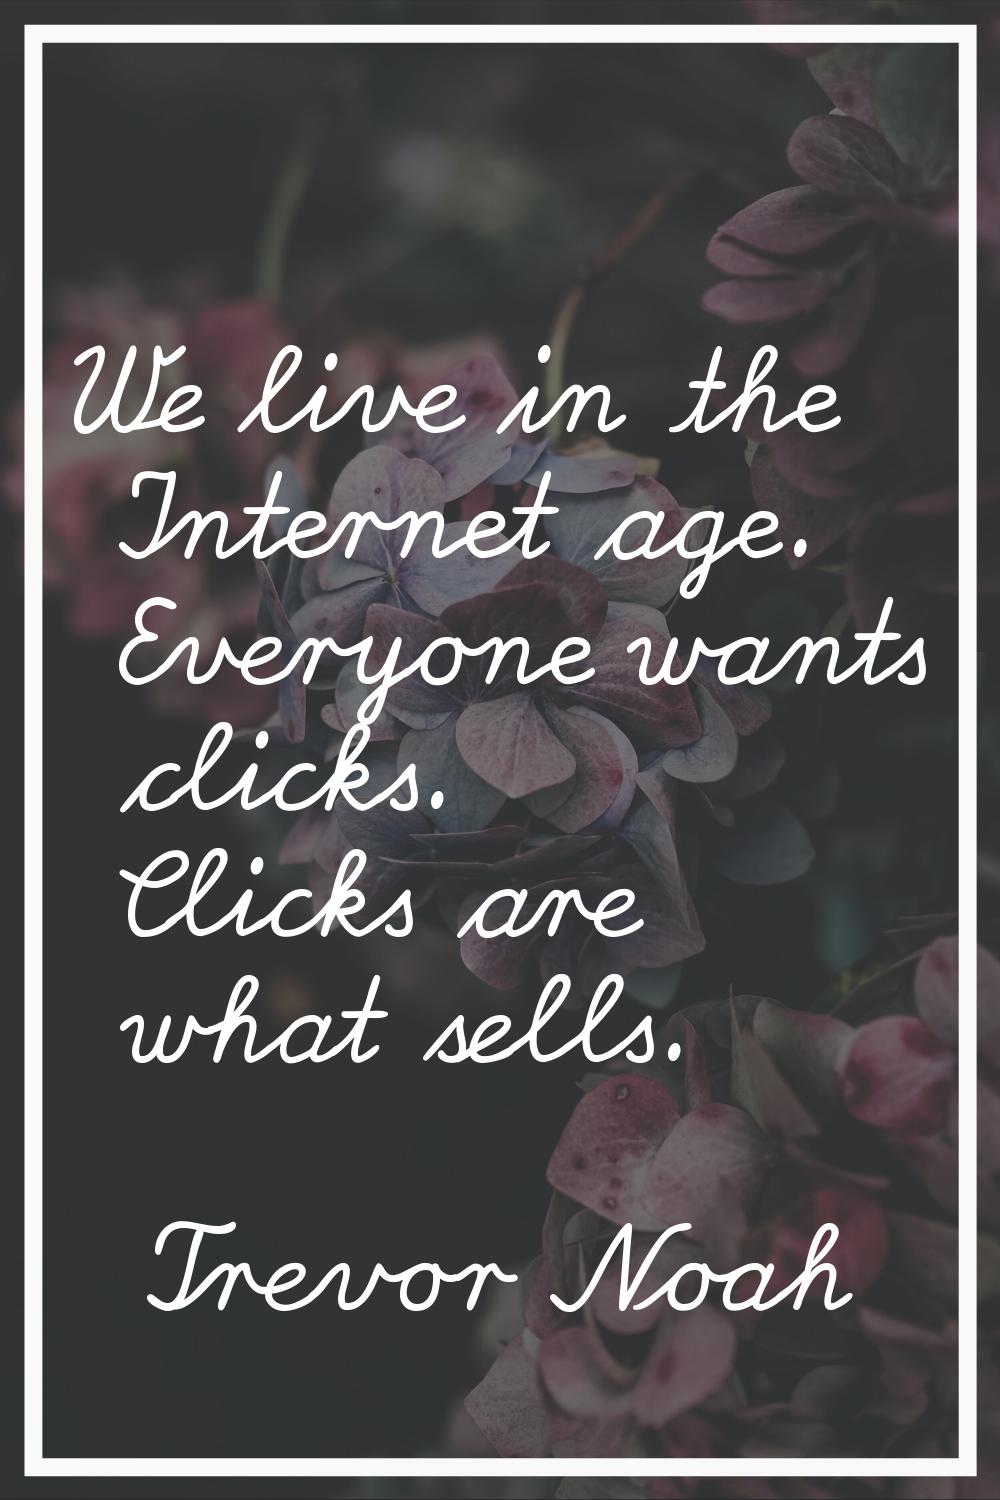 We live in the Internet age. Everyone wants clicks. Clicks are what sells.